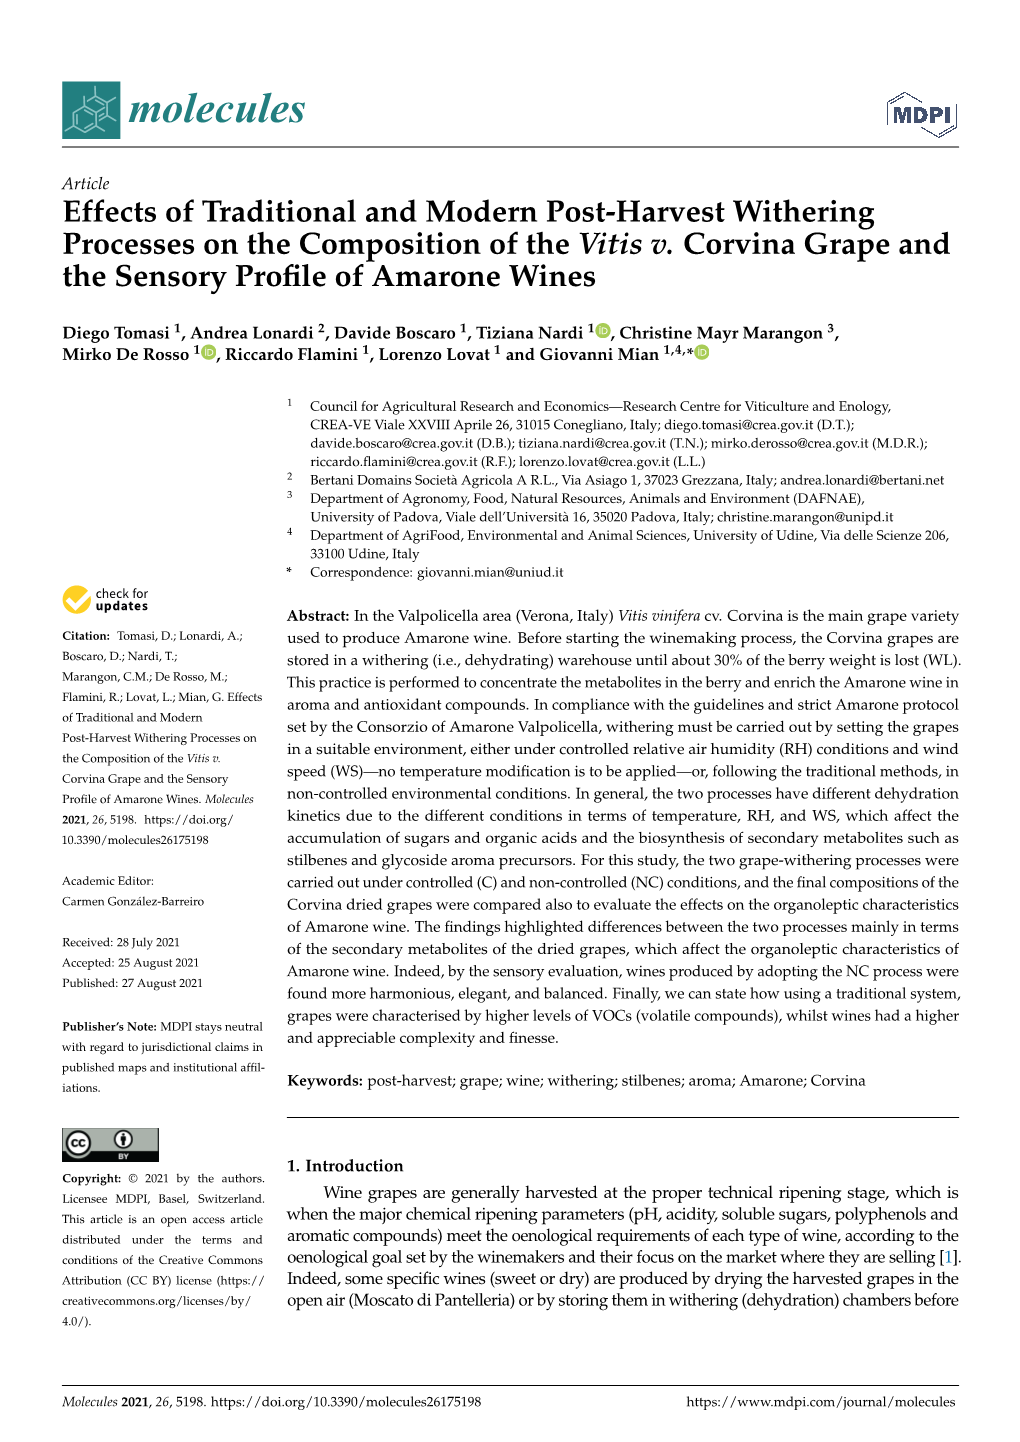 Effects of Traditional and Modern Post-Harvest Withering Processes on the Composition of the Vitis V